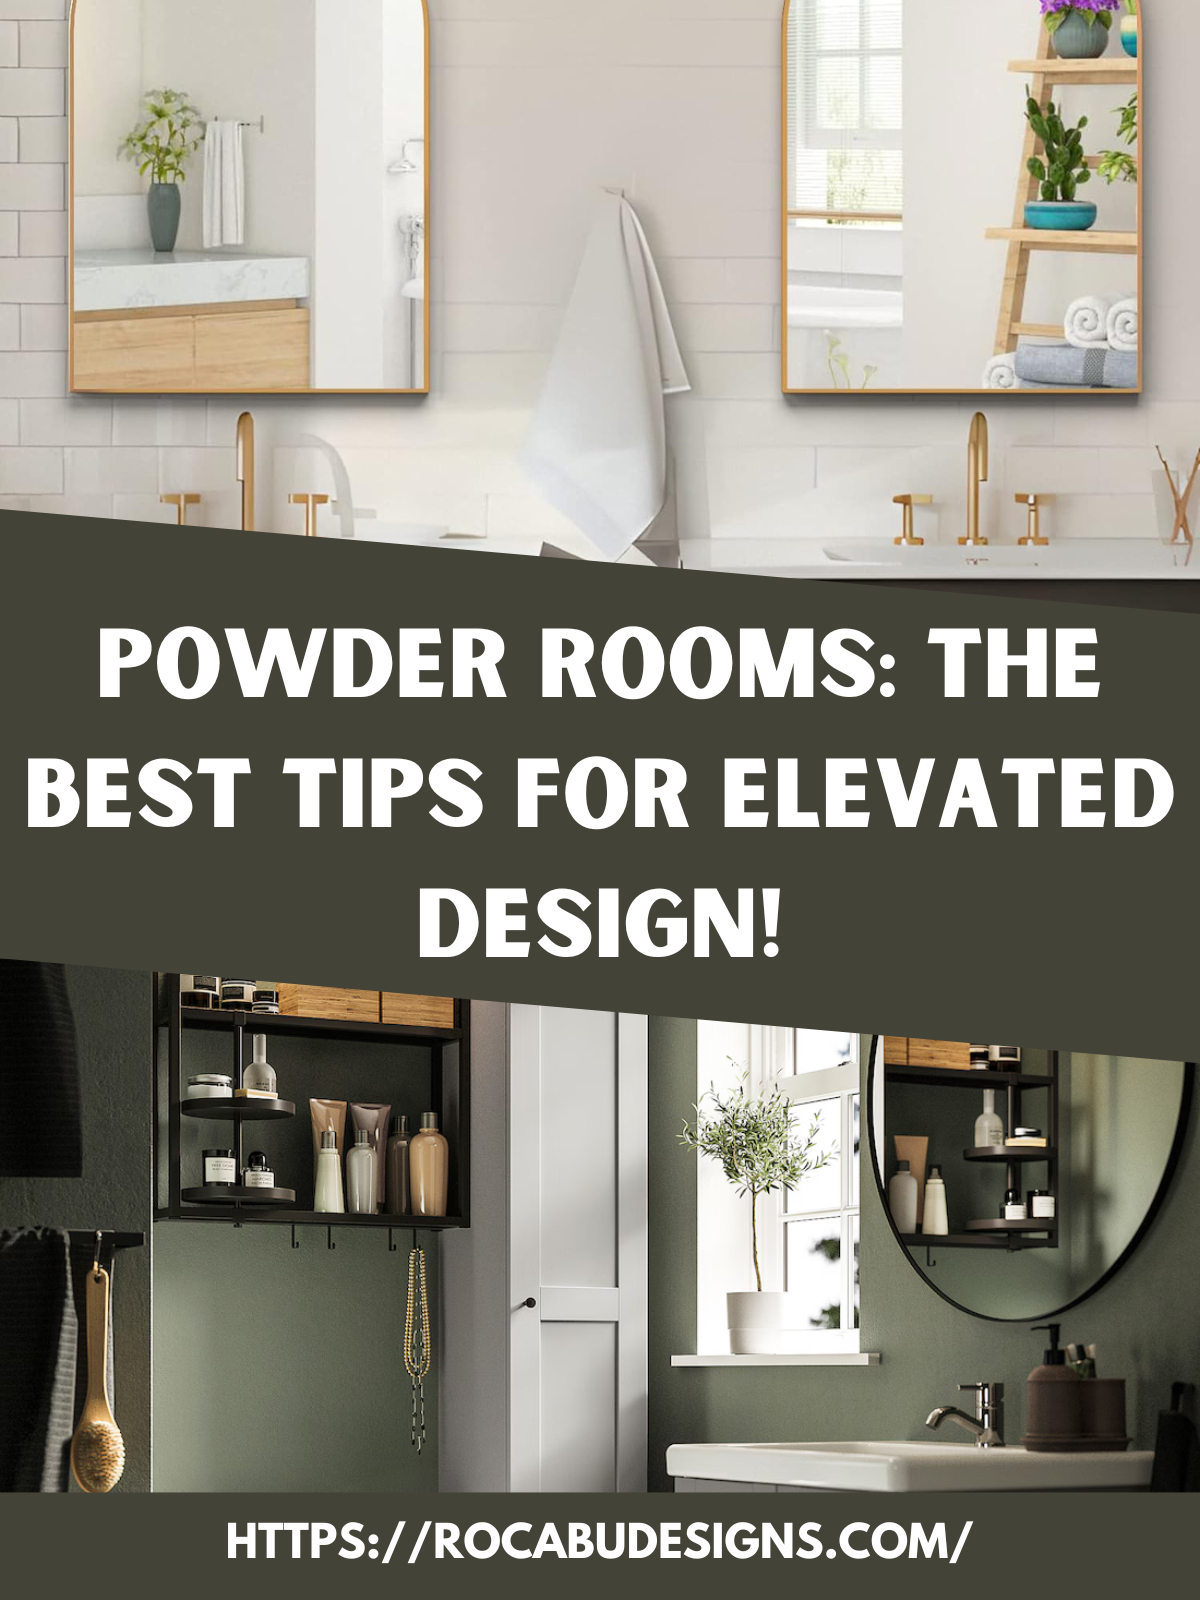 Powder Rooms: The Best Tips for Elevated Design!